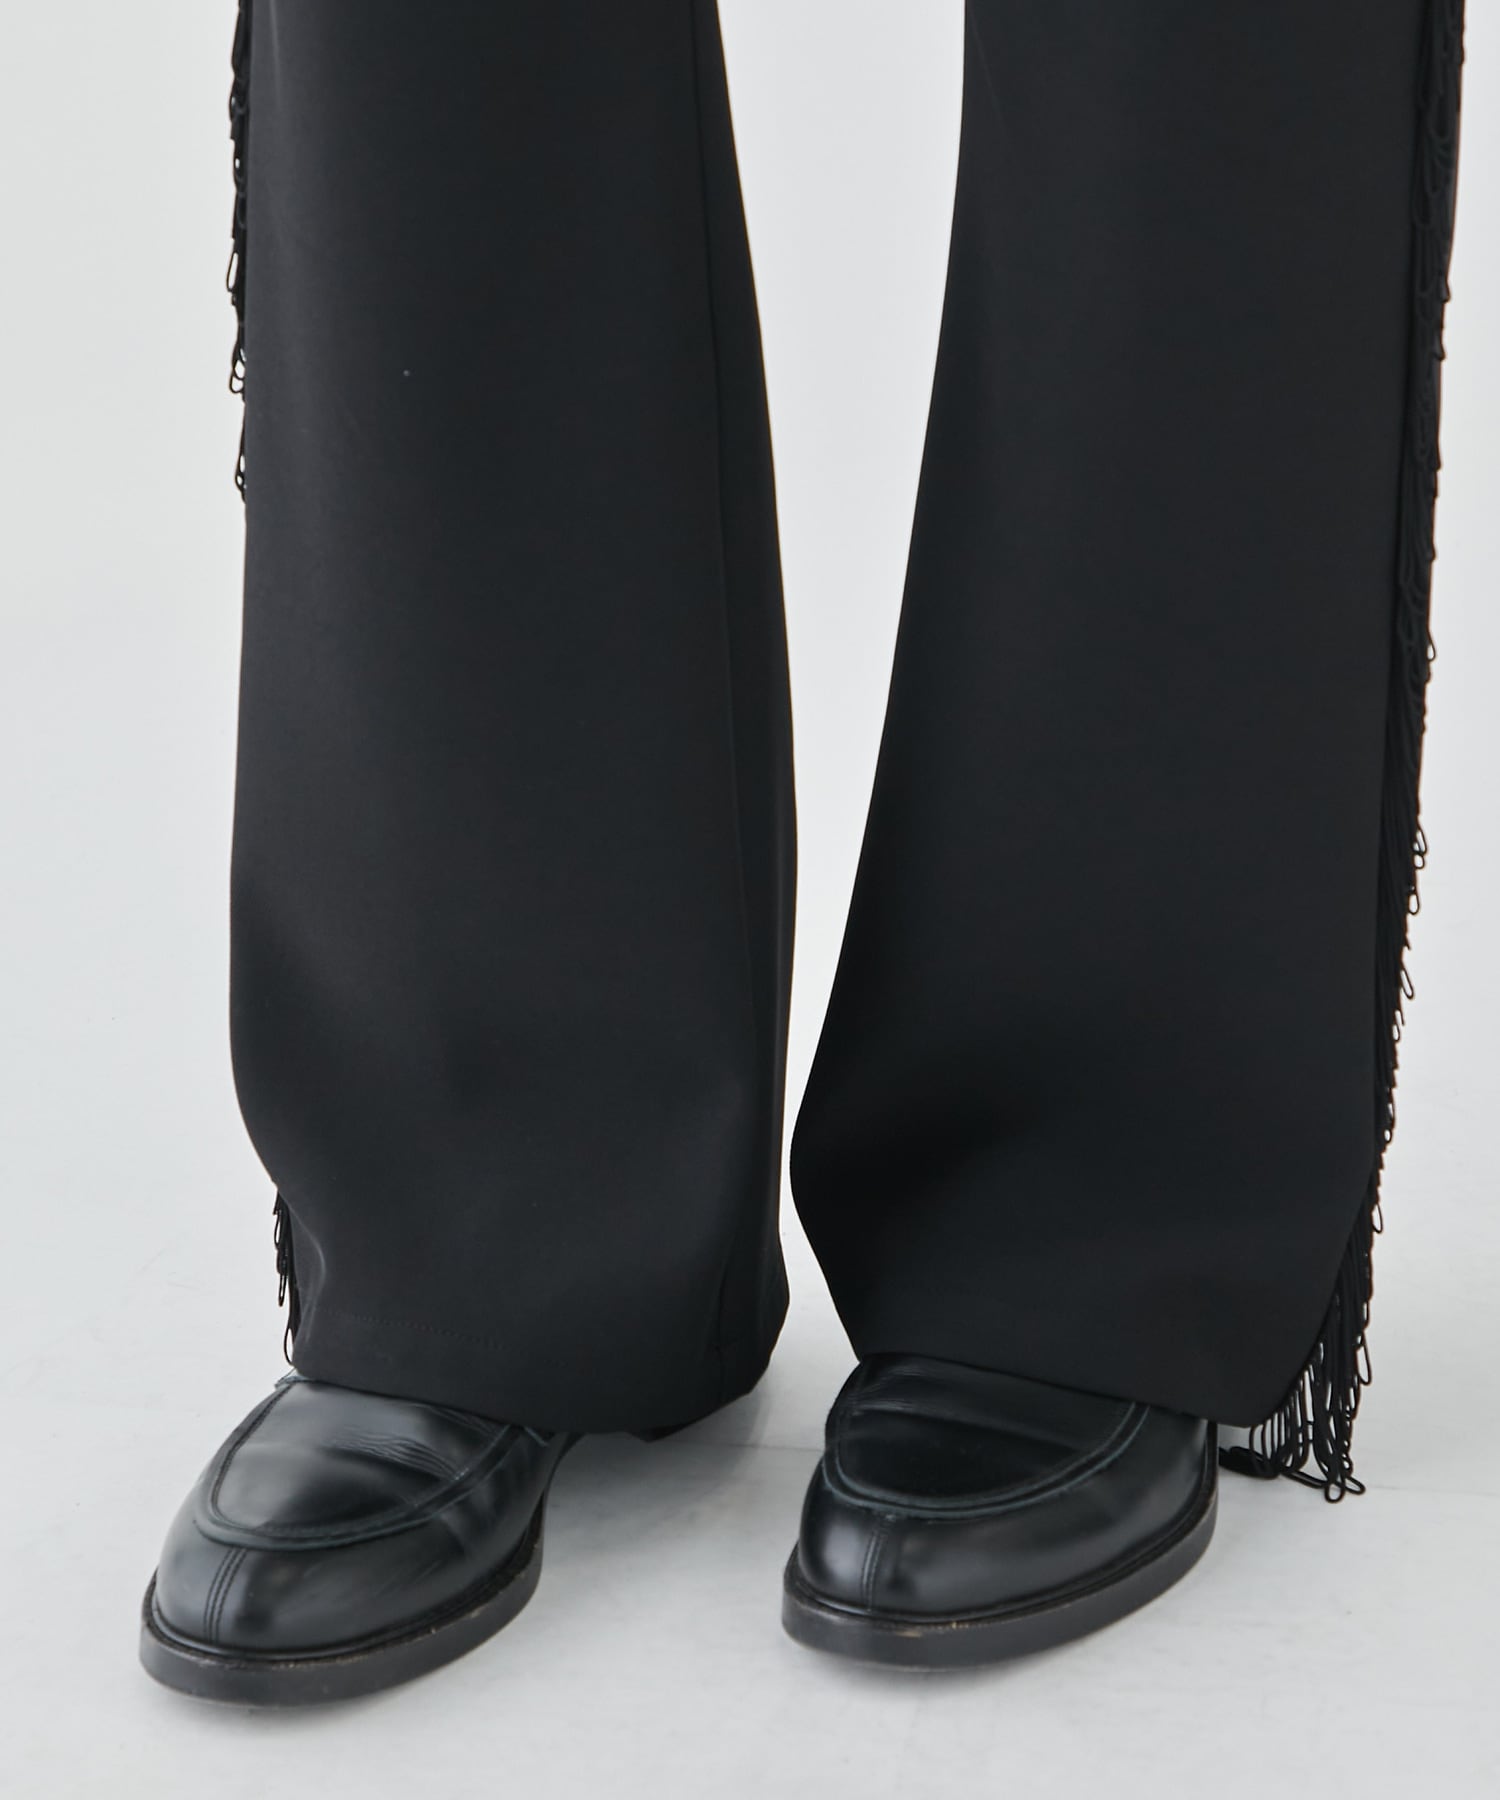 Fringe Boot-Cut Track Pant - Poly Kersey NEEDLES